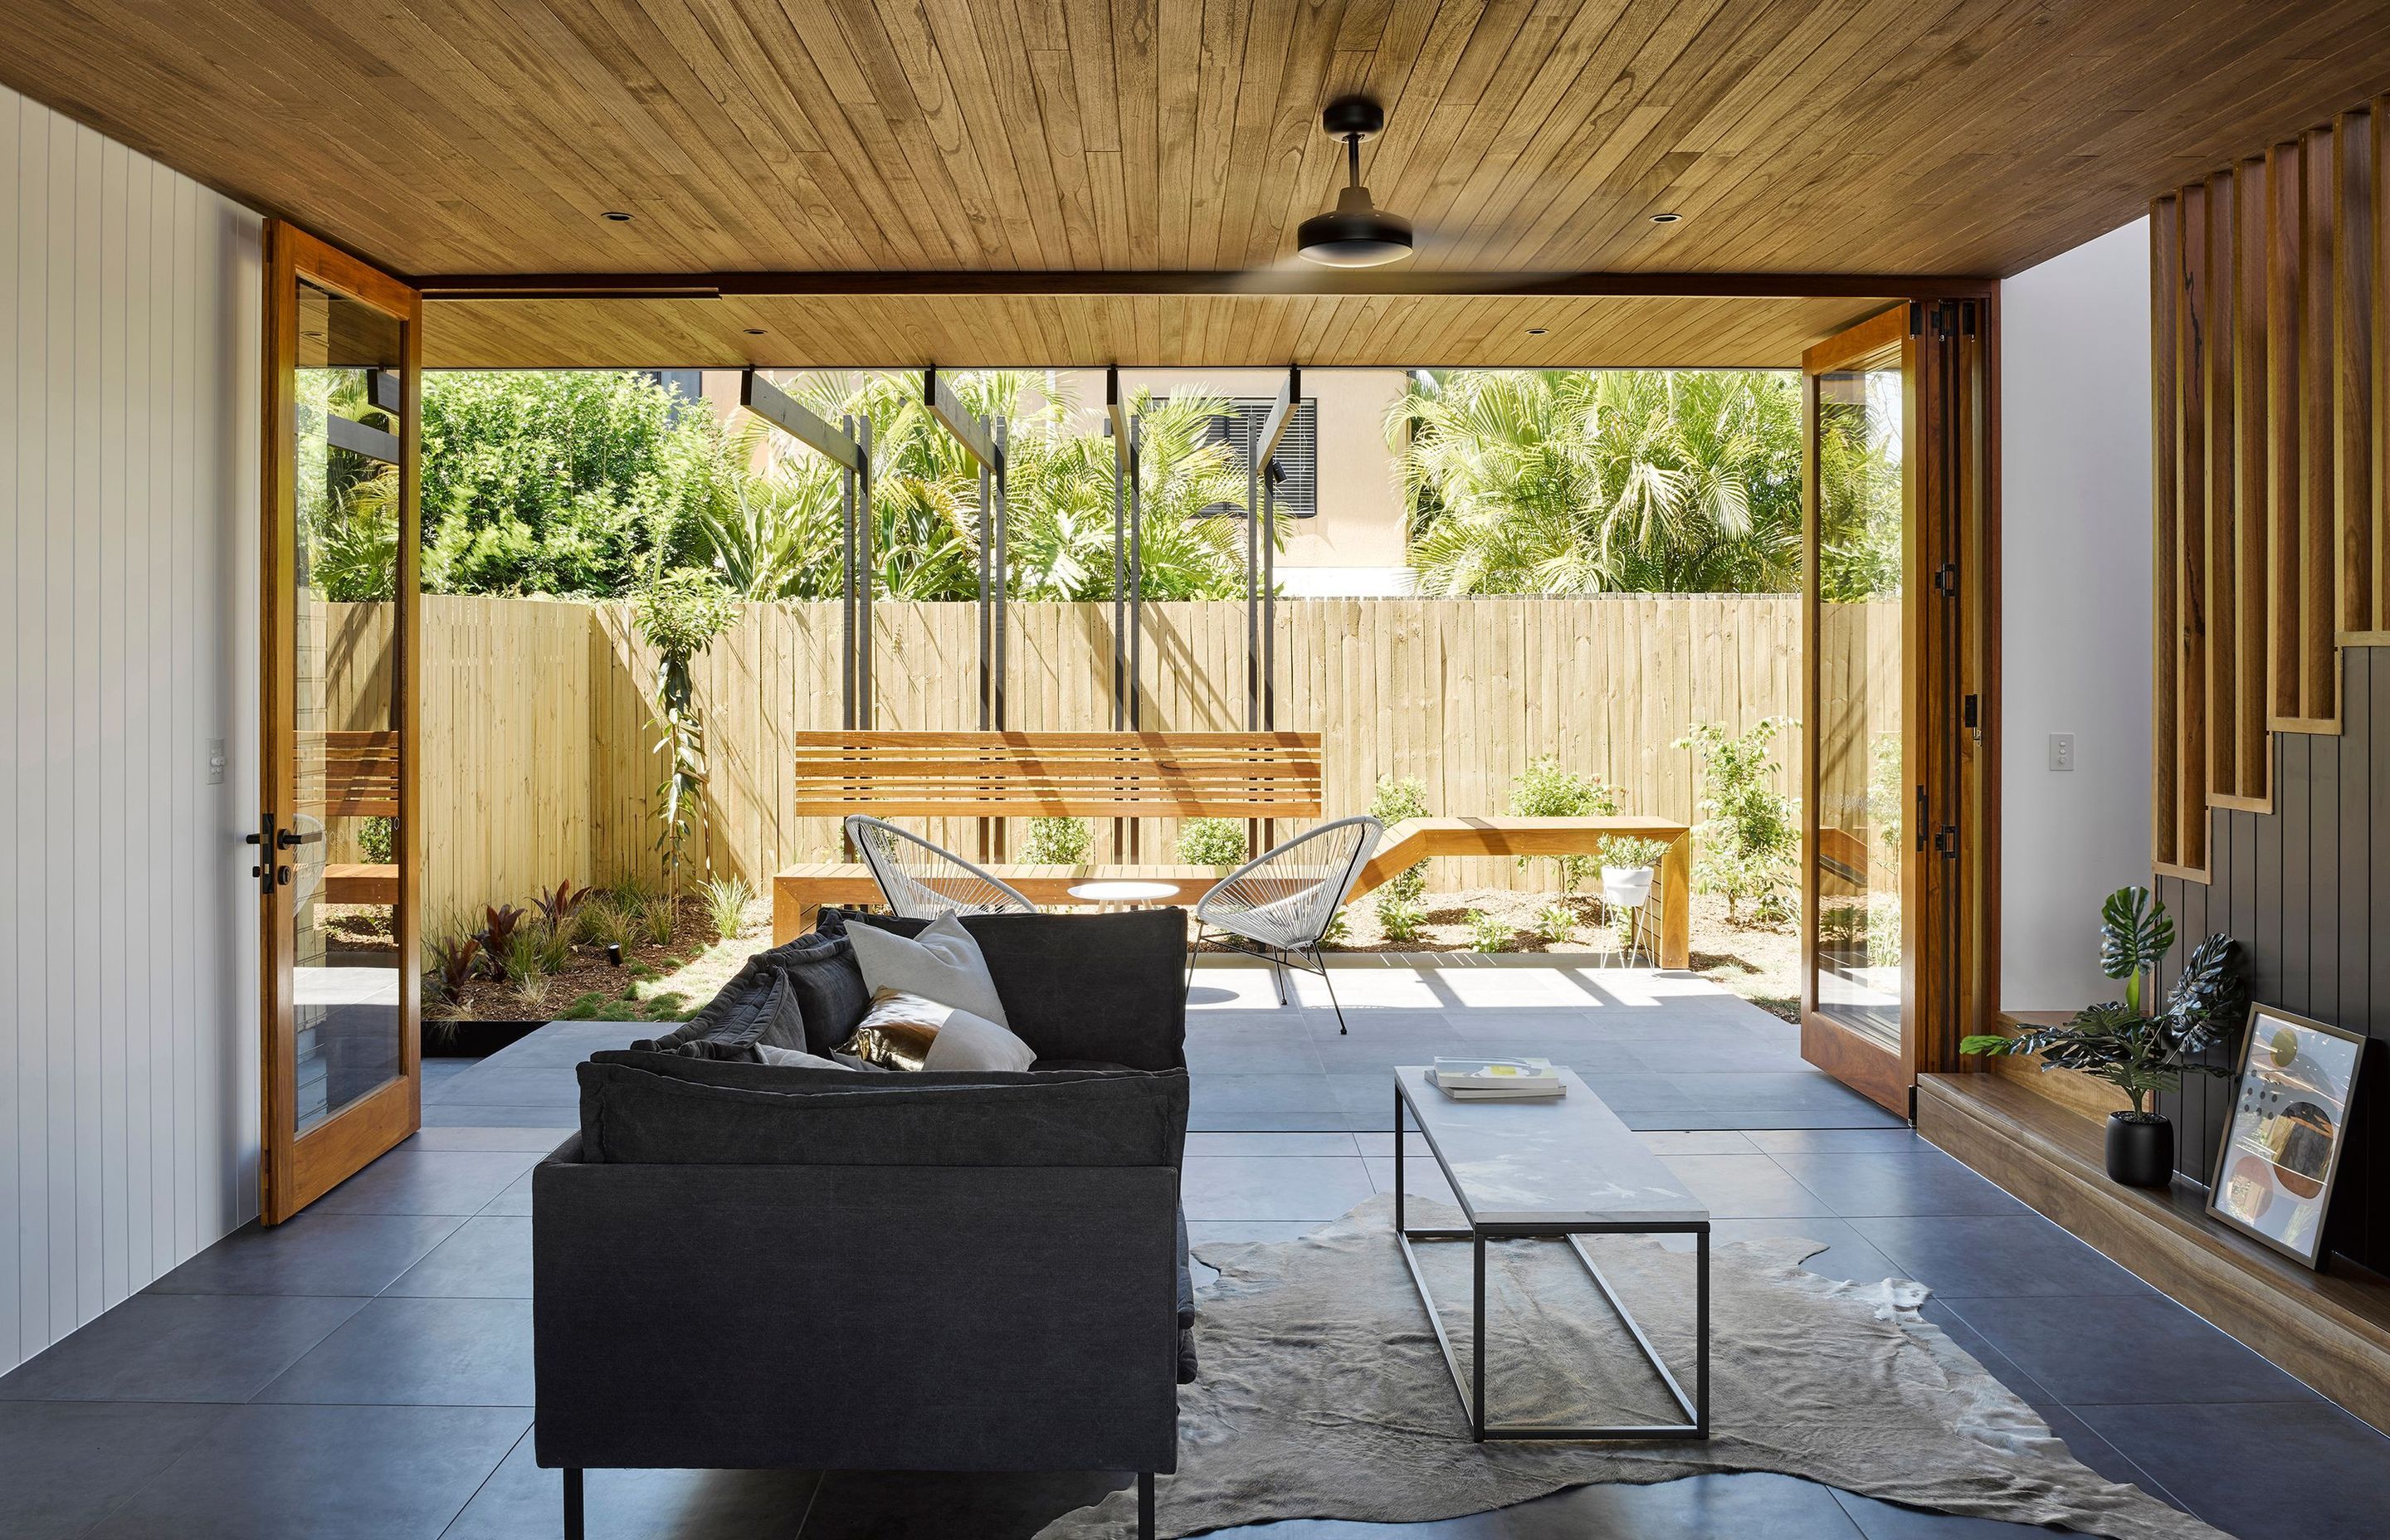 Photography: Christopher Frederick Jones, Roger D’Souza and Cathy Schusler | Living spaces extend into the landscape through the use of full height bi-fold doors. Floor and ceiling finishes seamlessly continue outside to further add to the feeling of spac